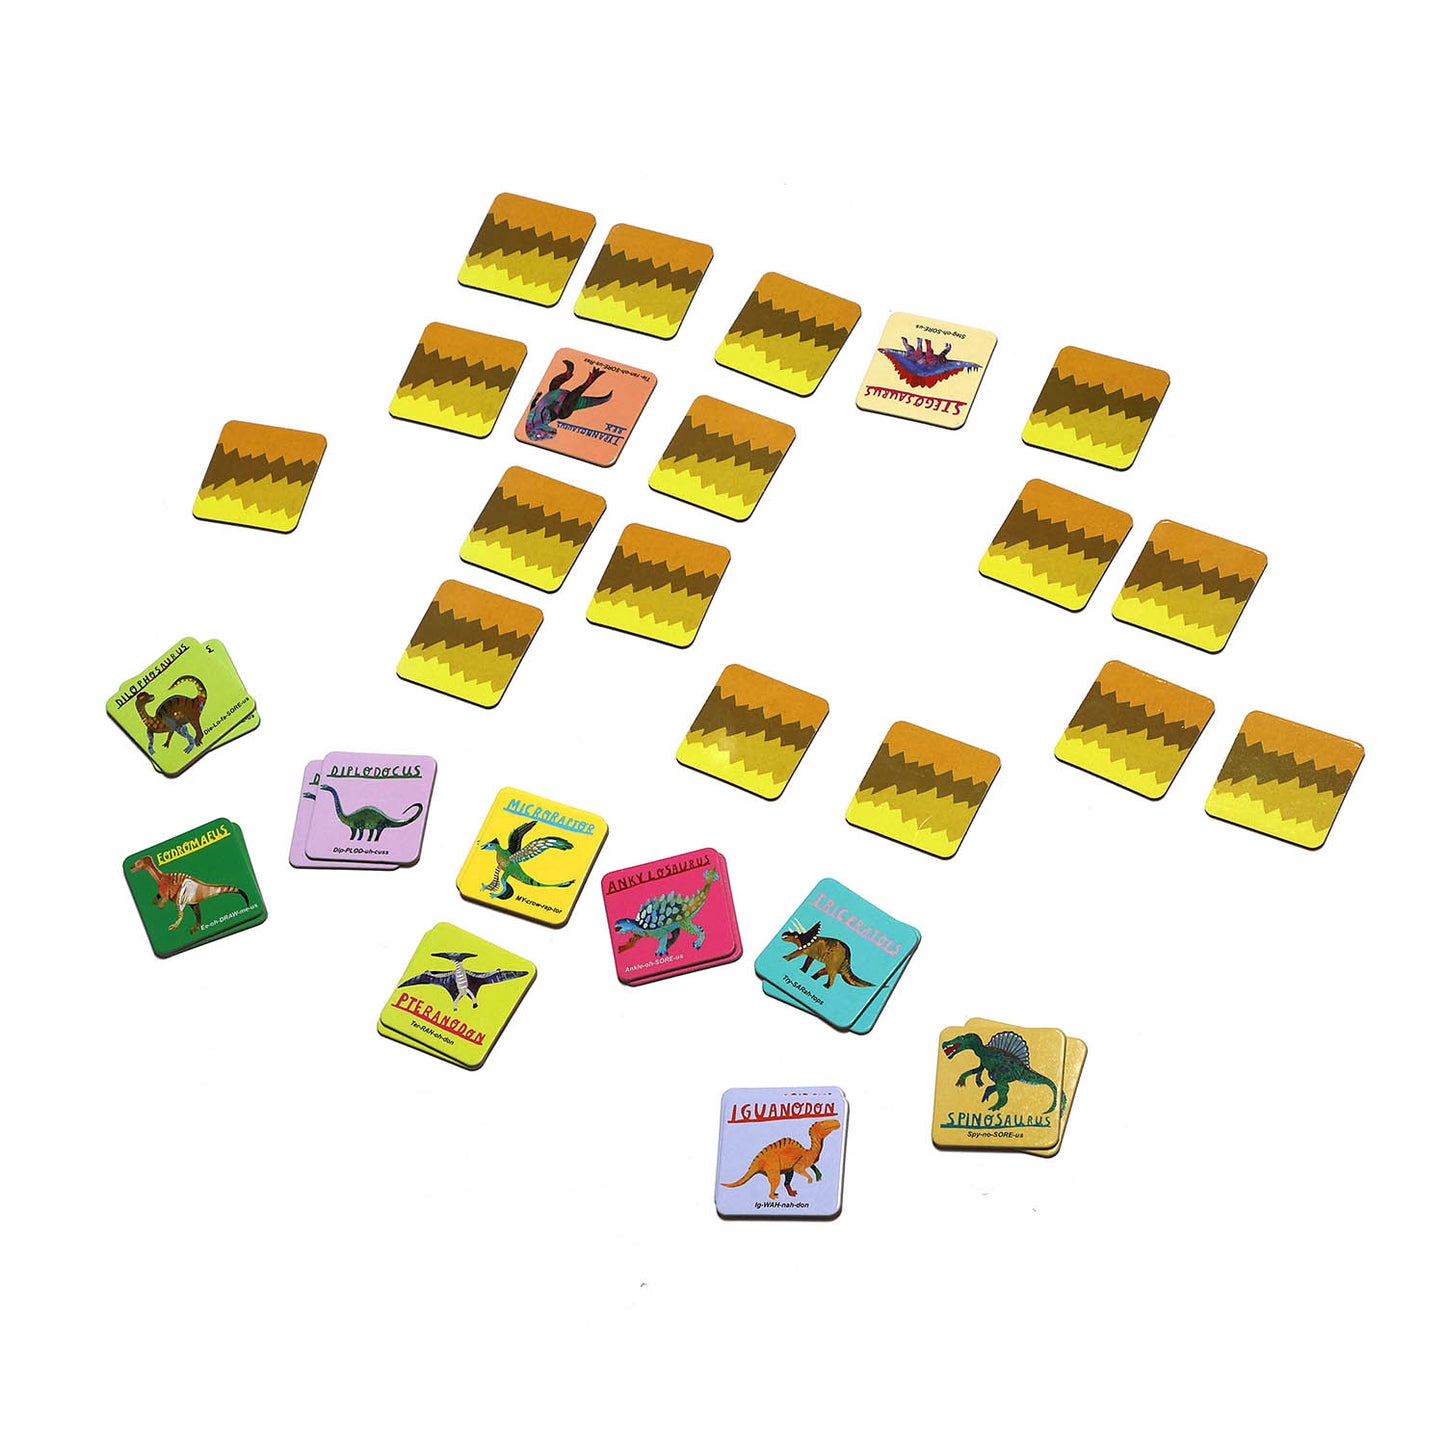 Dinosaurs Little Memory & Matching Game